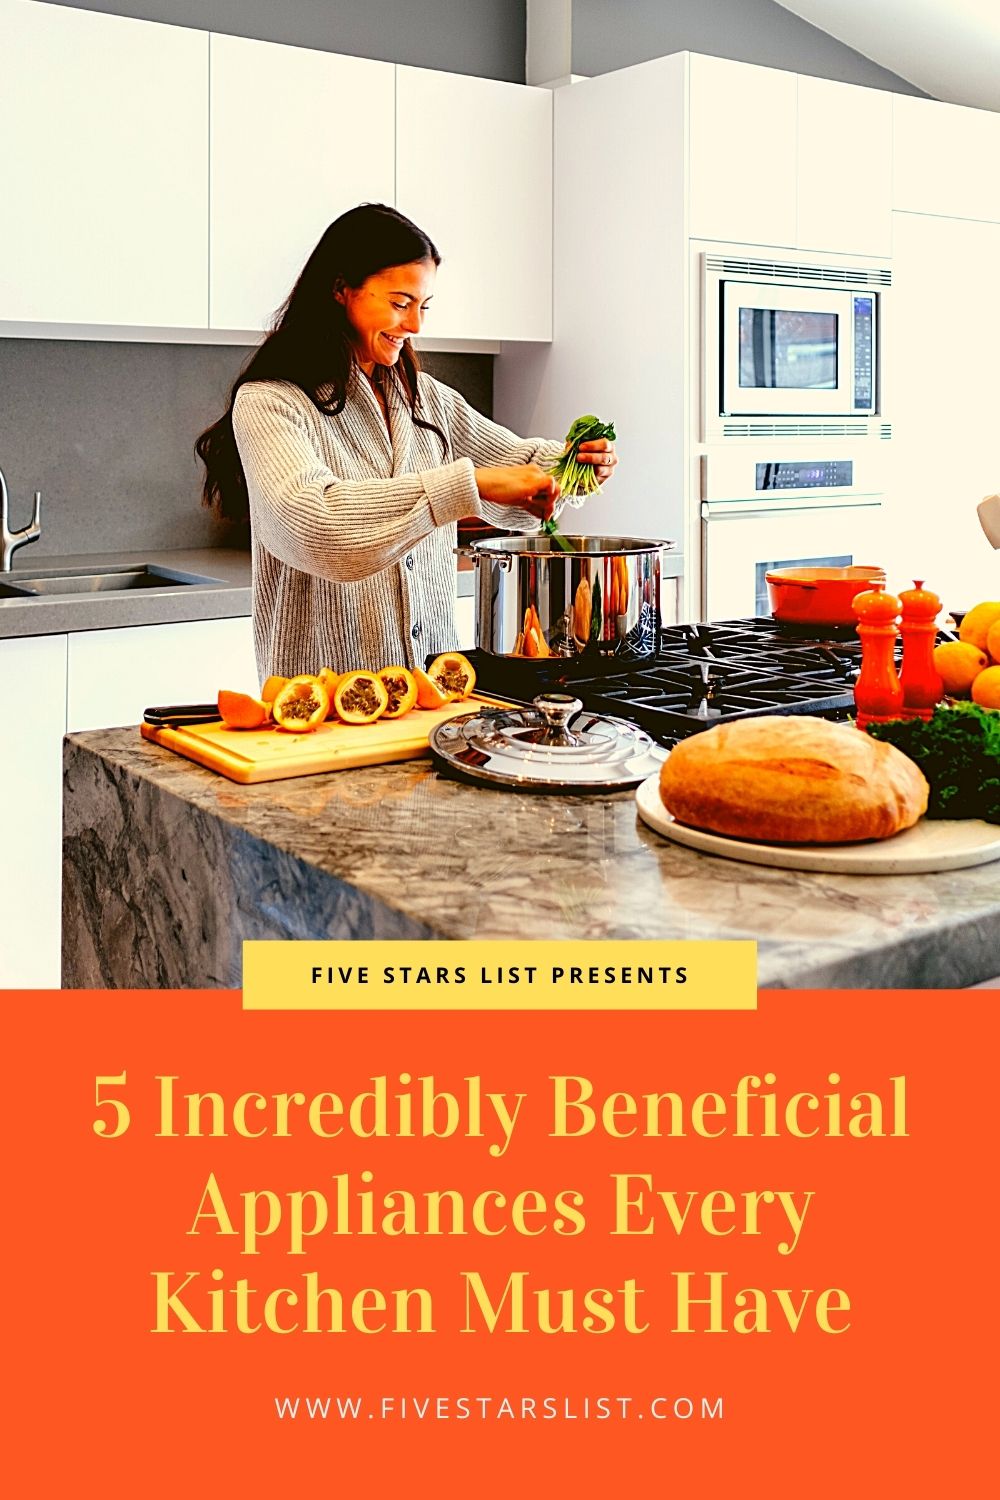 5 Incredibly Beneficial Appliances Every Kitchen Must Have